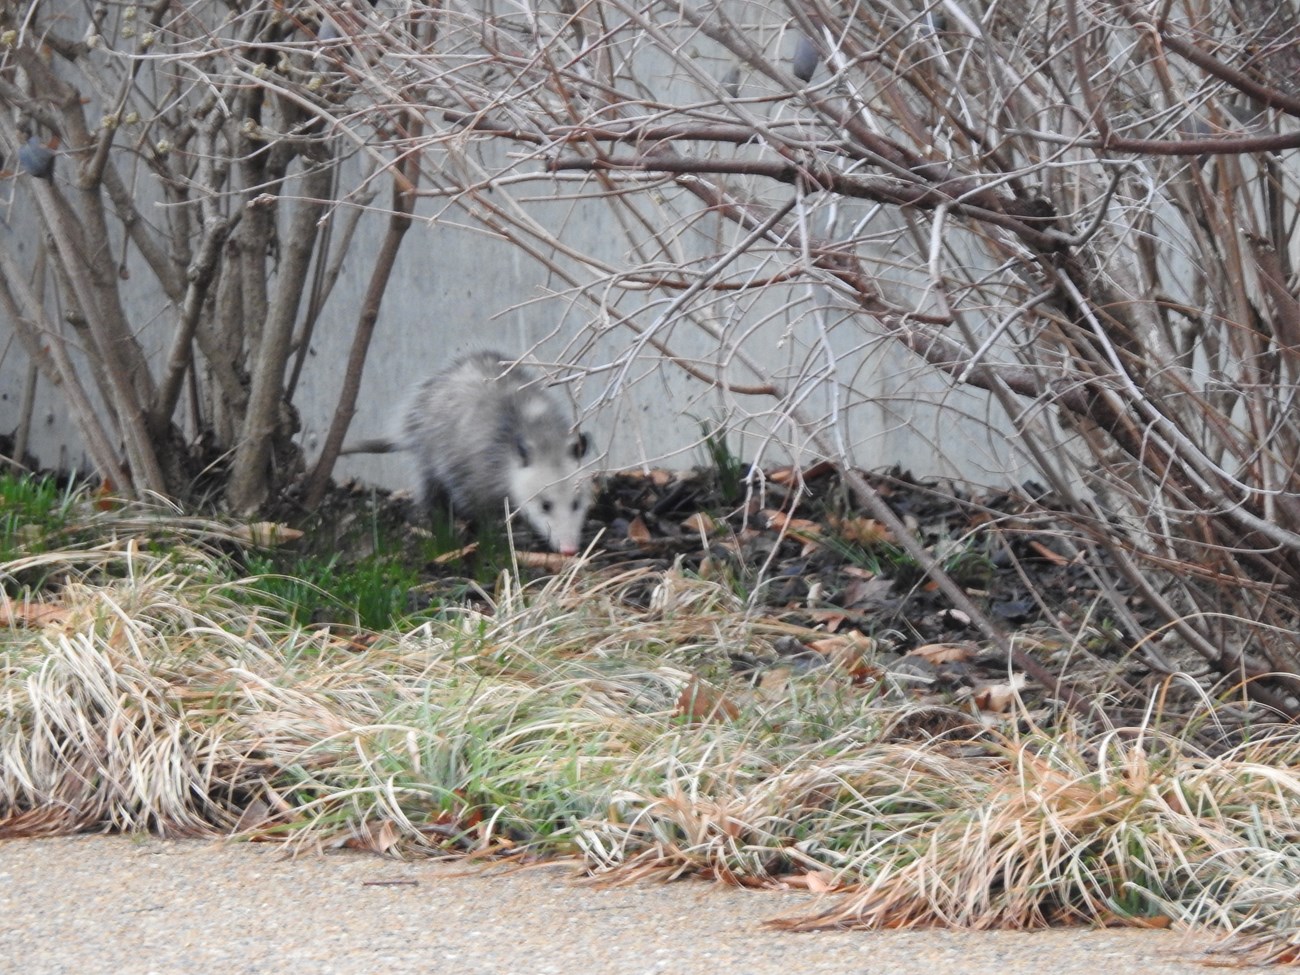 A grey animal with a long snout, between two bushes.